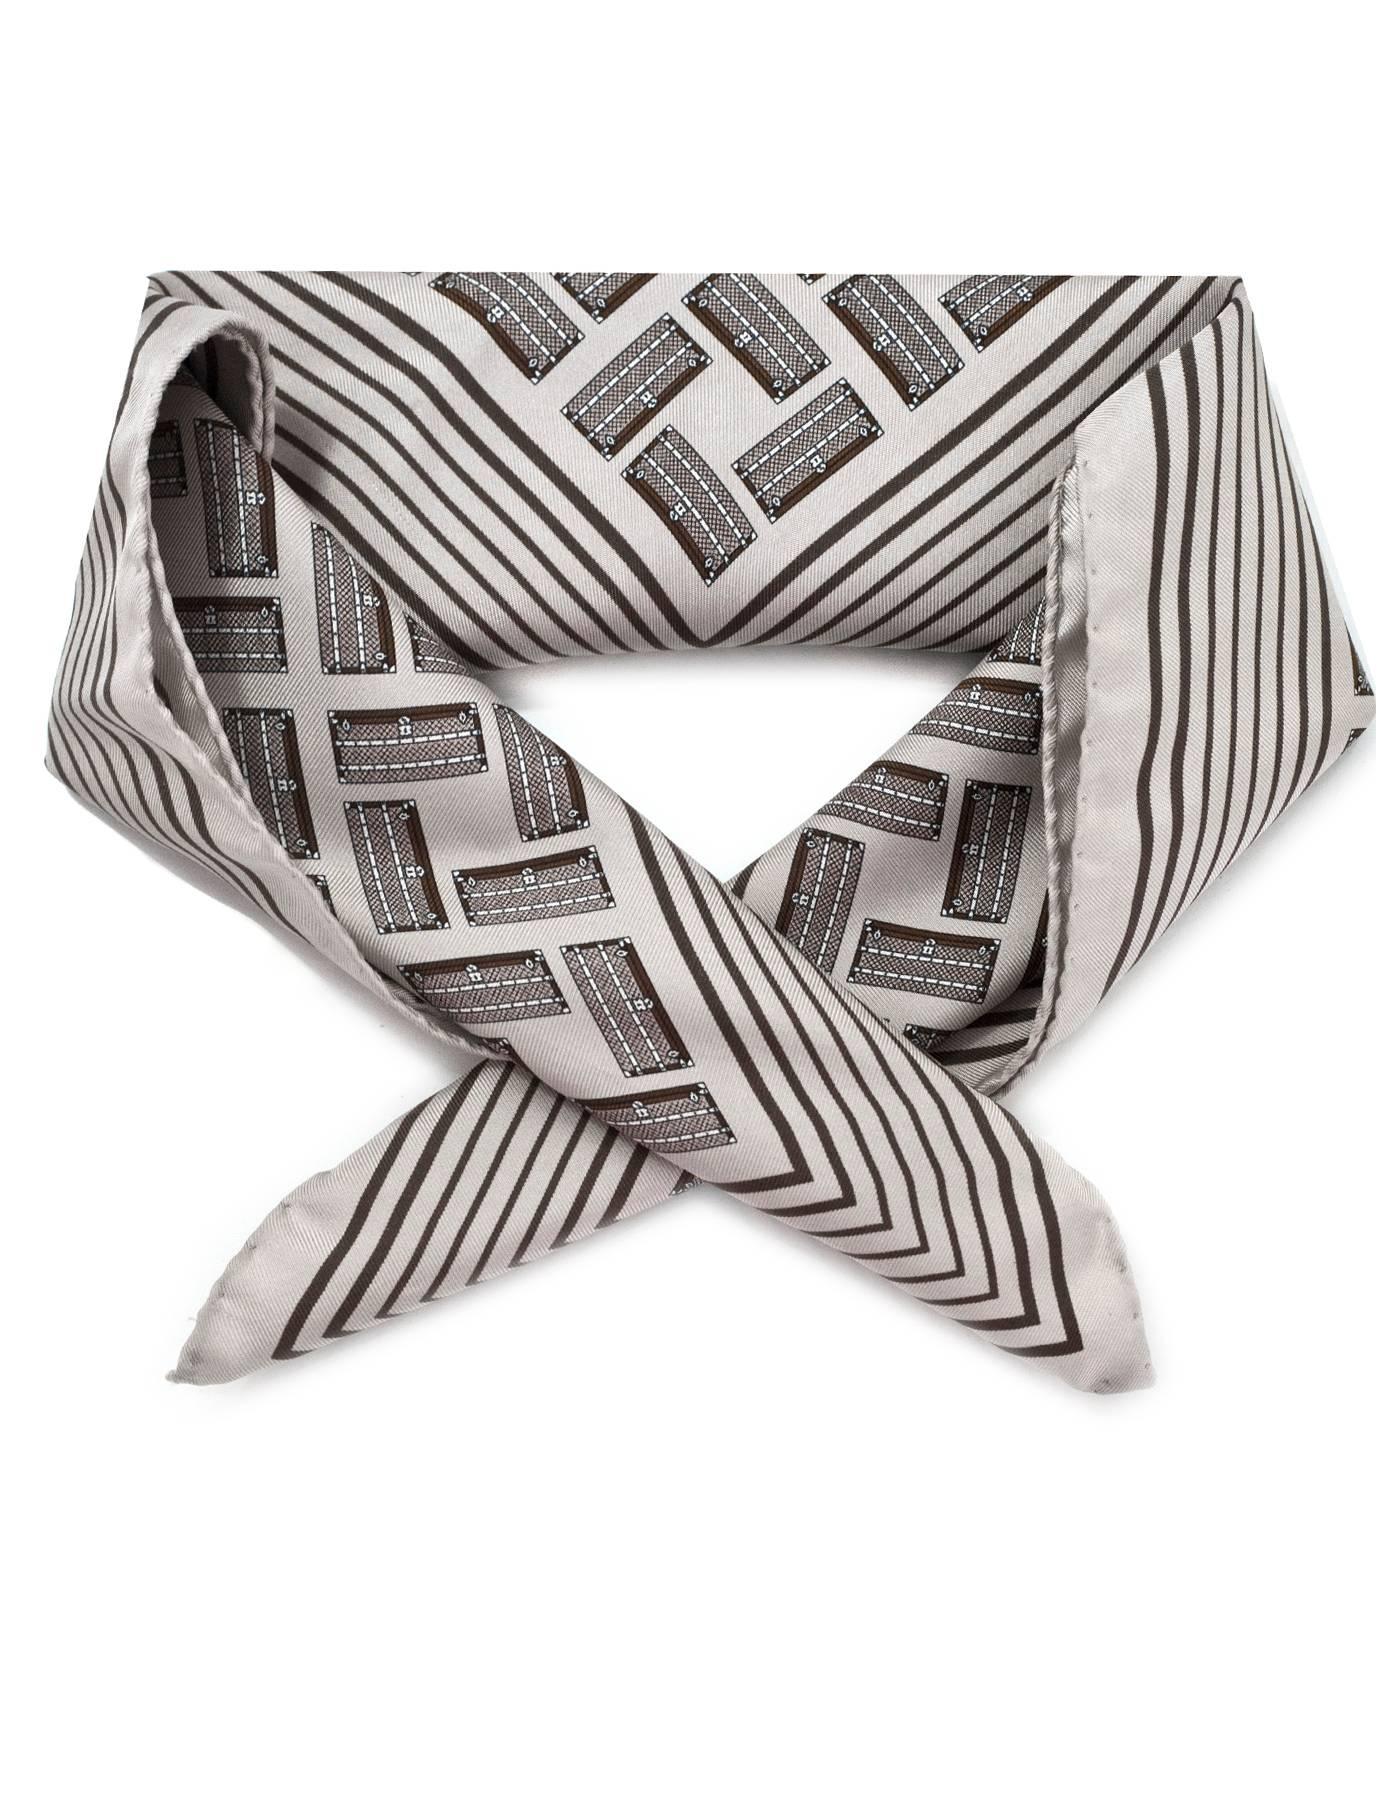 Louis Vuitton Grey Silk Trunks Scarf

Made In: Italy
Color: Grey
Composition: 100% Silk
Overall Condition: Excellent pre-owned condition, very light marks

Measurements:
Length: 18